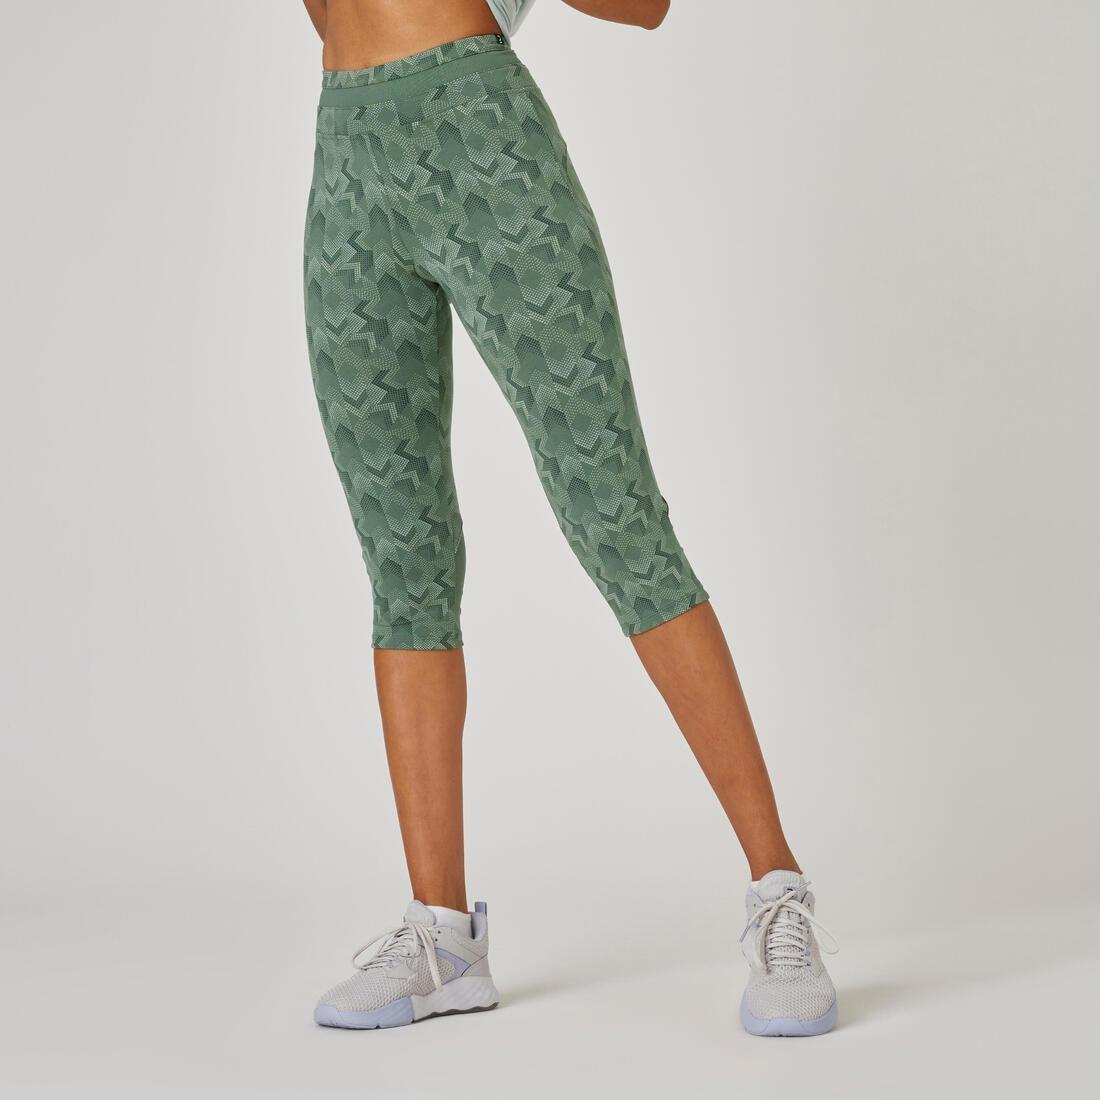 DOMYOS - Majority Cotton Fitness Cropped Bottoms - 520, Green